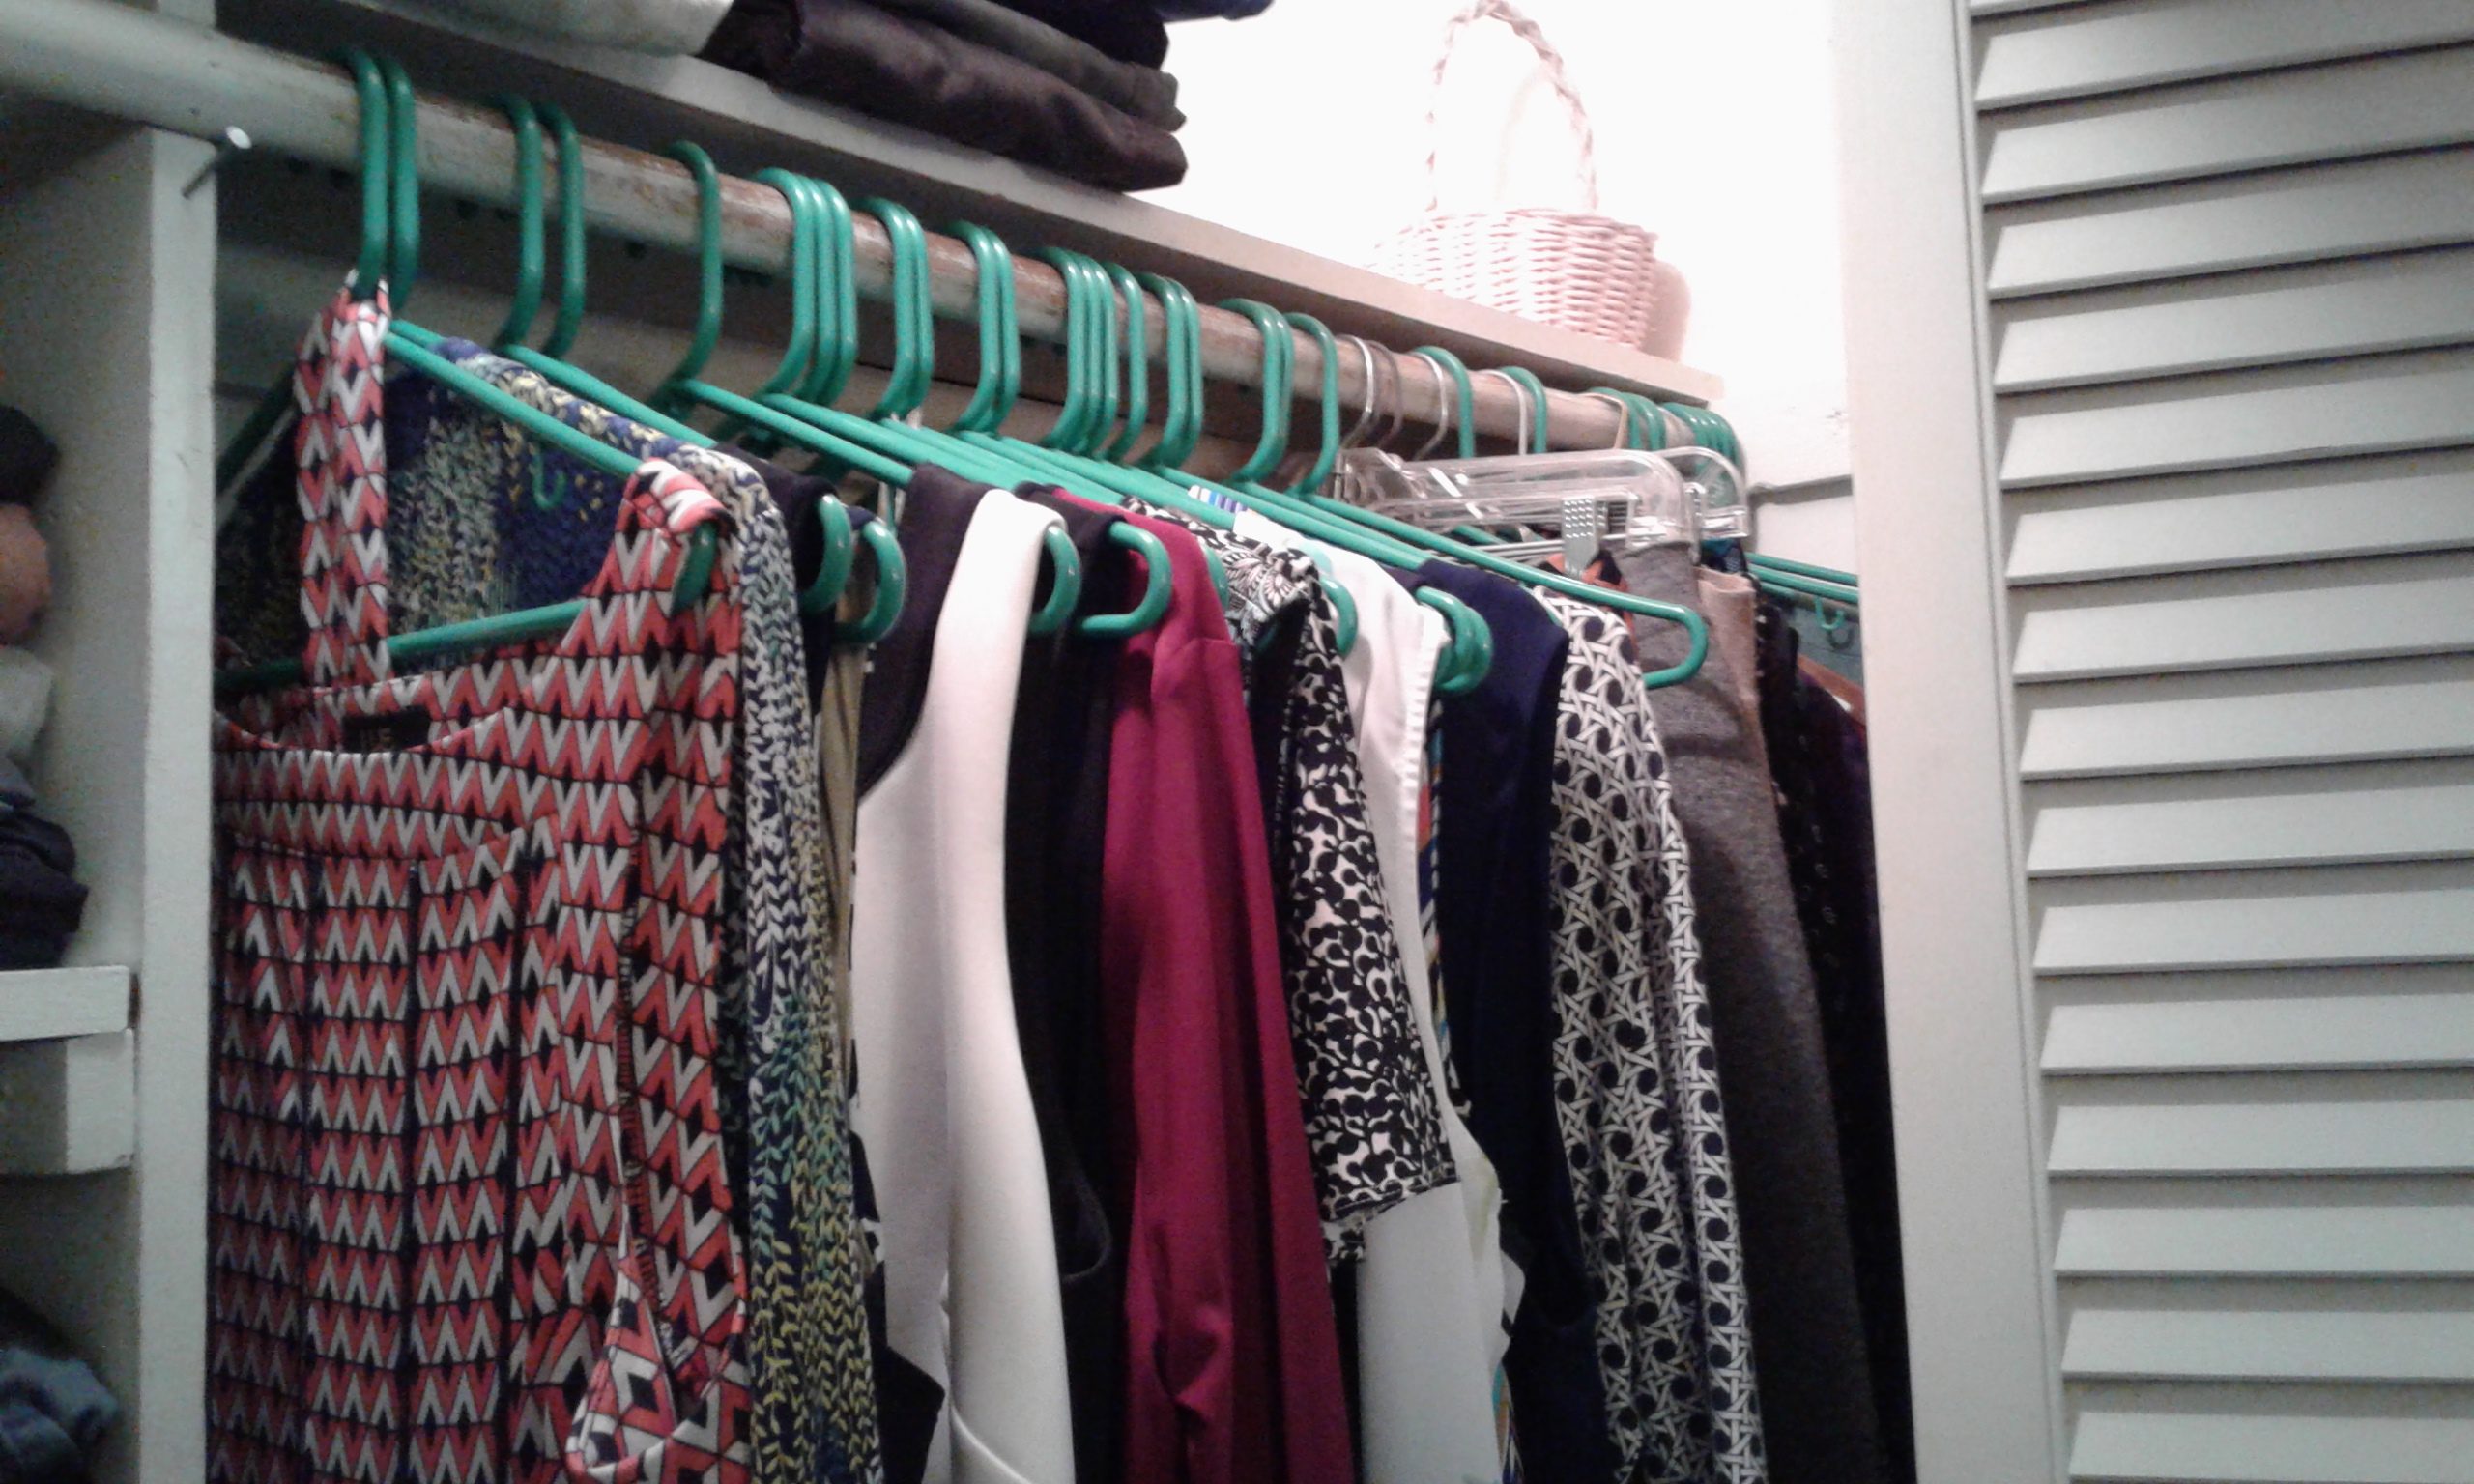 Hanging clothes much easier to see and choose!